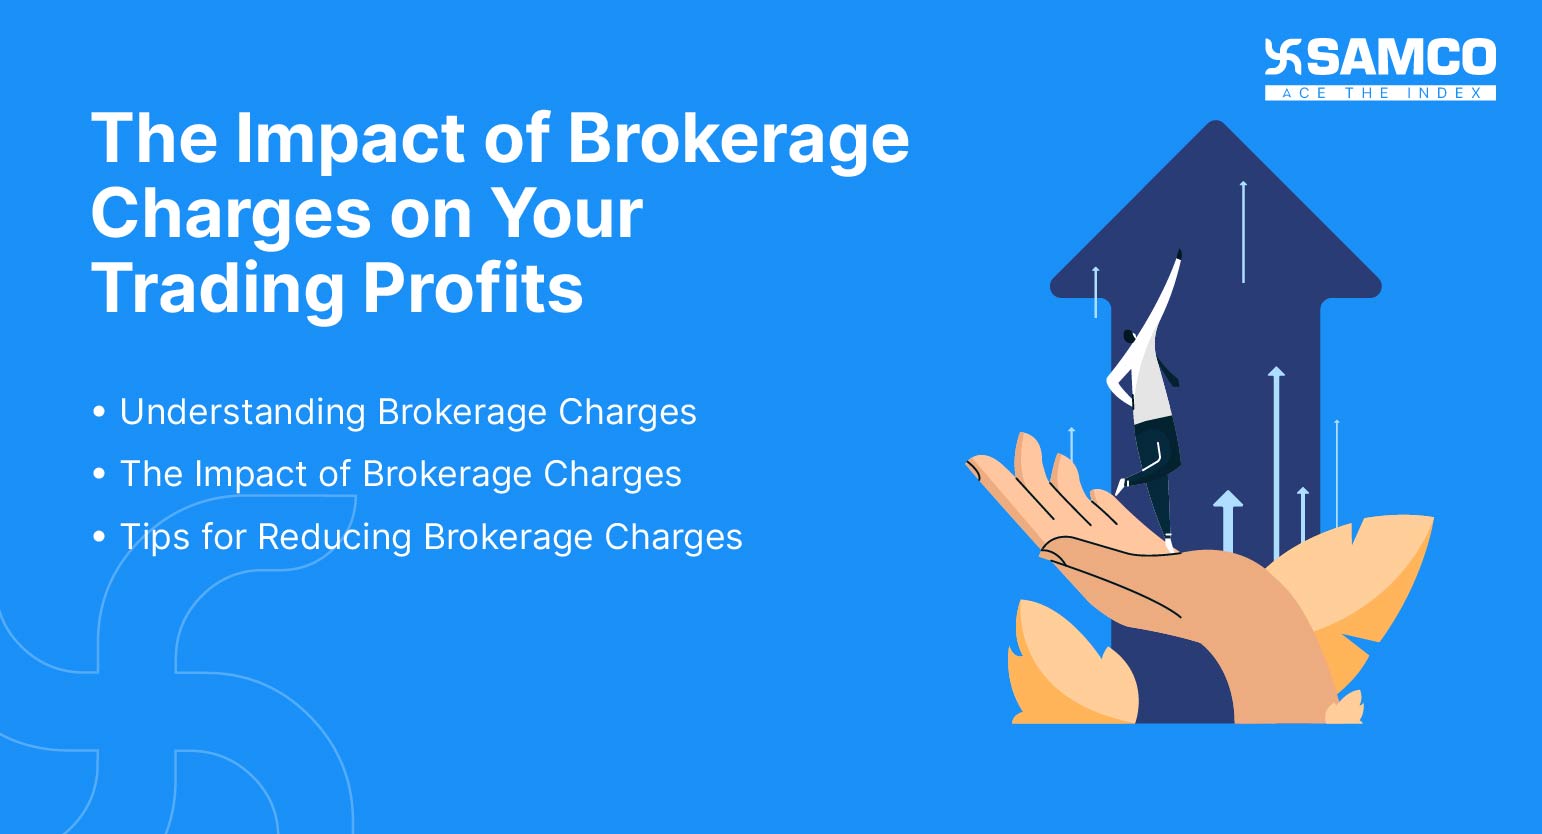 The Impact of Brokerage Charges on Your Trading Profits